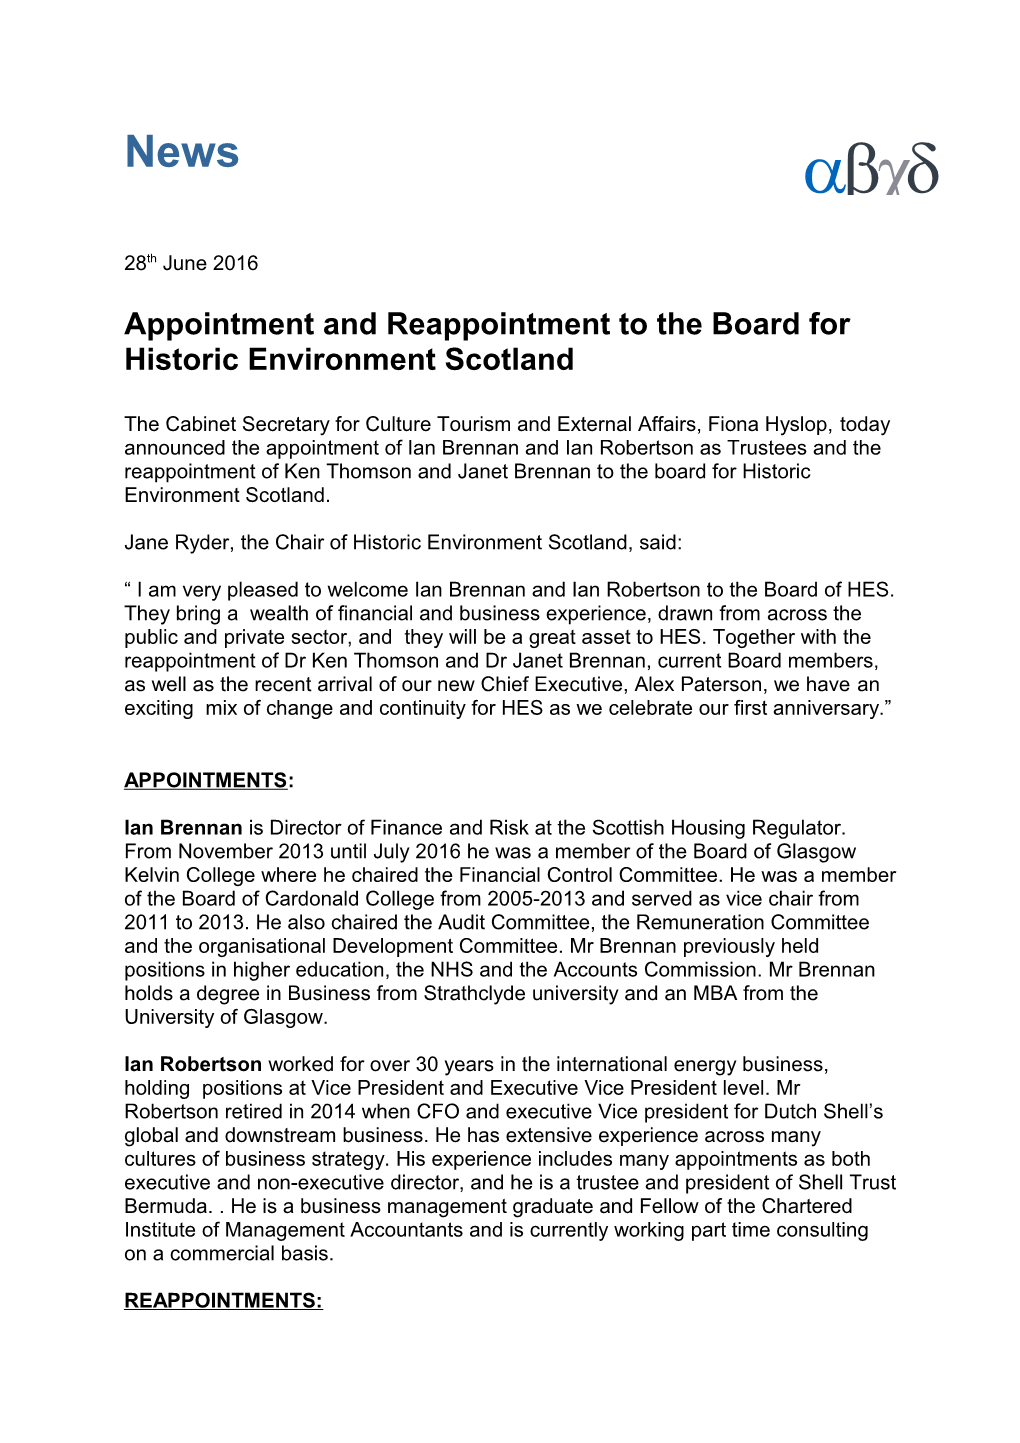 Appointment and Reappointment to the Board for Historic Environment Scotland